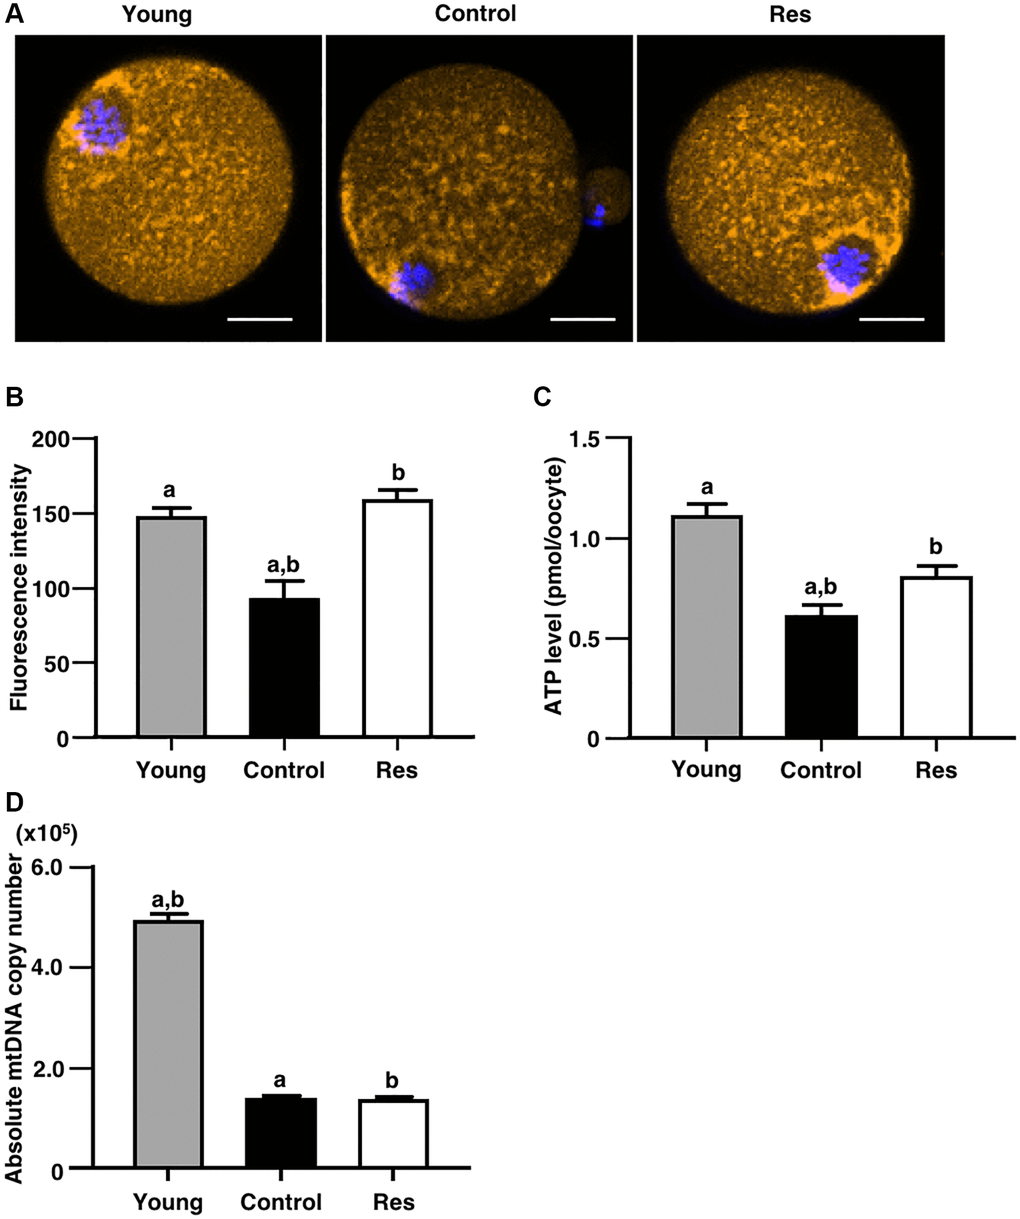 Effects of resveratrol treatment on mitochondrial functions in oocytes derived from aging mice. MII oocytes derived from aging mice without (control) or with one week of resveratrol (Res) treatment and young animals without resveratrol treatment (young) were used for different mitochondrial assays. (A and B) Mitochondrial membrane potential. (A) Representative fluorescence images showing mitochondrial membrane potential visualized by MitoTracker™ dye (orange). Oocyte nuclei were counterstained with Hoechst 33342 (blue). Scale bars, 20 μm. (B) The fluorescence intensities of mitochondrial membrane potential. The intensity of mitochondrial fluorescence in ooplasm of MII oocyte was measured by excluding that in the first polar body (control: n = 25, Res: n = 15 and young: n = 26 oocytes). (C) The ATP levels in MII oocytes. The ATP level per MII oocyte was measured using the ATP-Glo™ Bioluminometric Cell Viability Assay Kit (control: n = 24, Res: n = 16 and young: n = 17 oocytes). (D) The mitochondrial DNA (mtDNA) copy numbers of MII oocytes (10 oocytes from each group). The copy number was measured by absolute real-time RT-PCR. (control: n = 11, Res: n = 13 and young: n = 18 groups). Bars represent means ± SE. A, Bp 